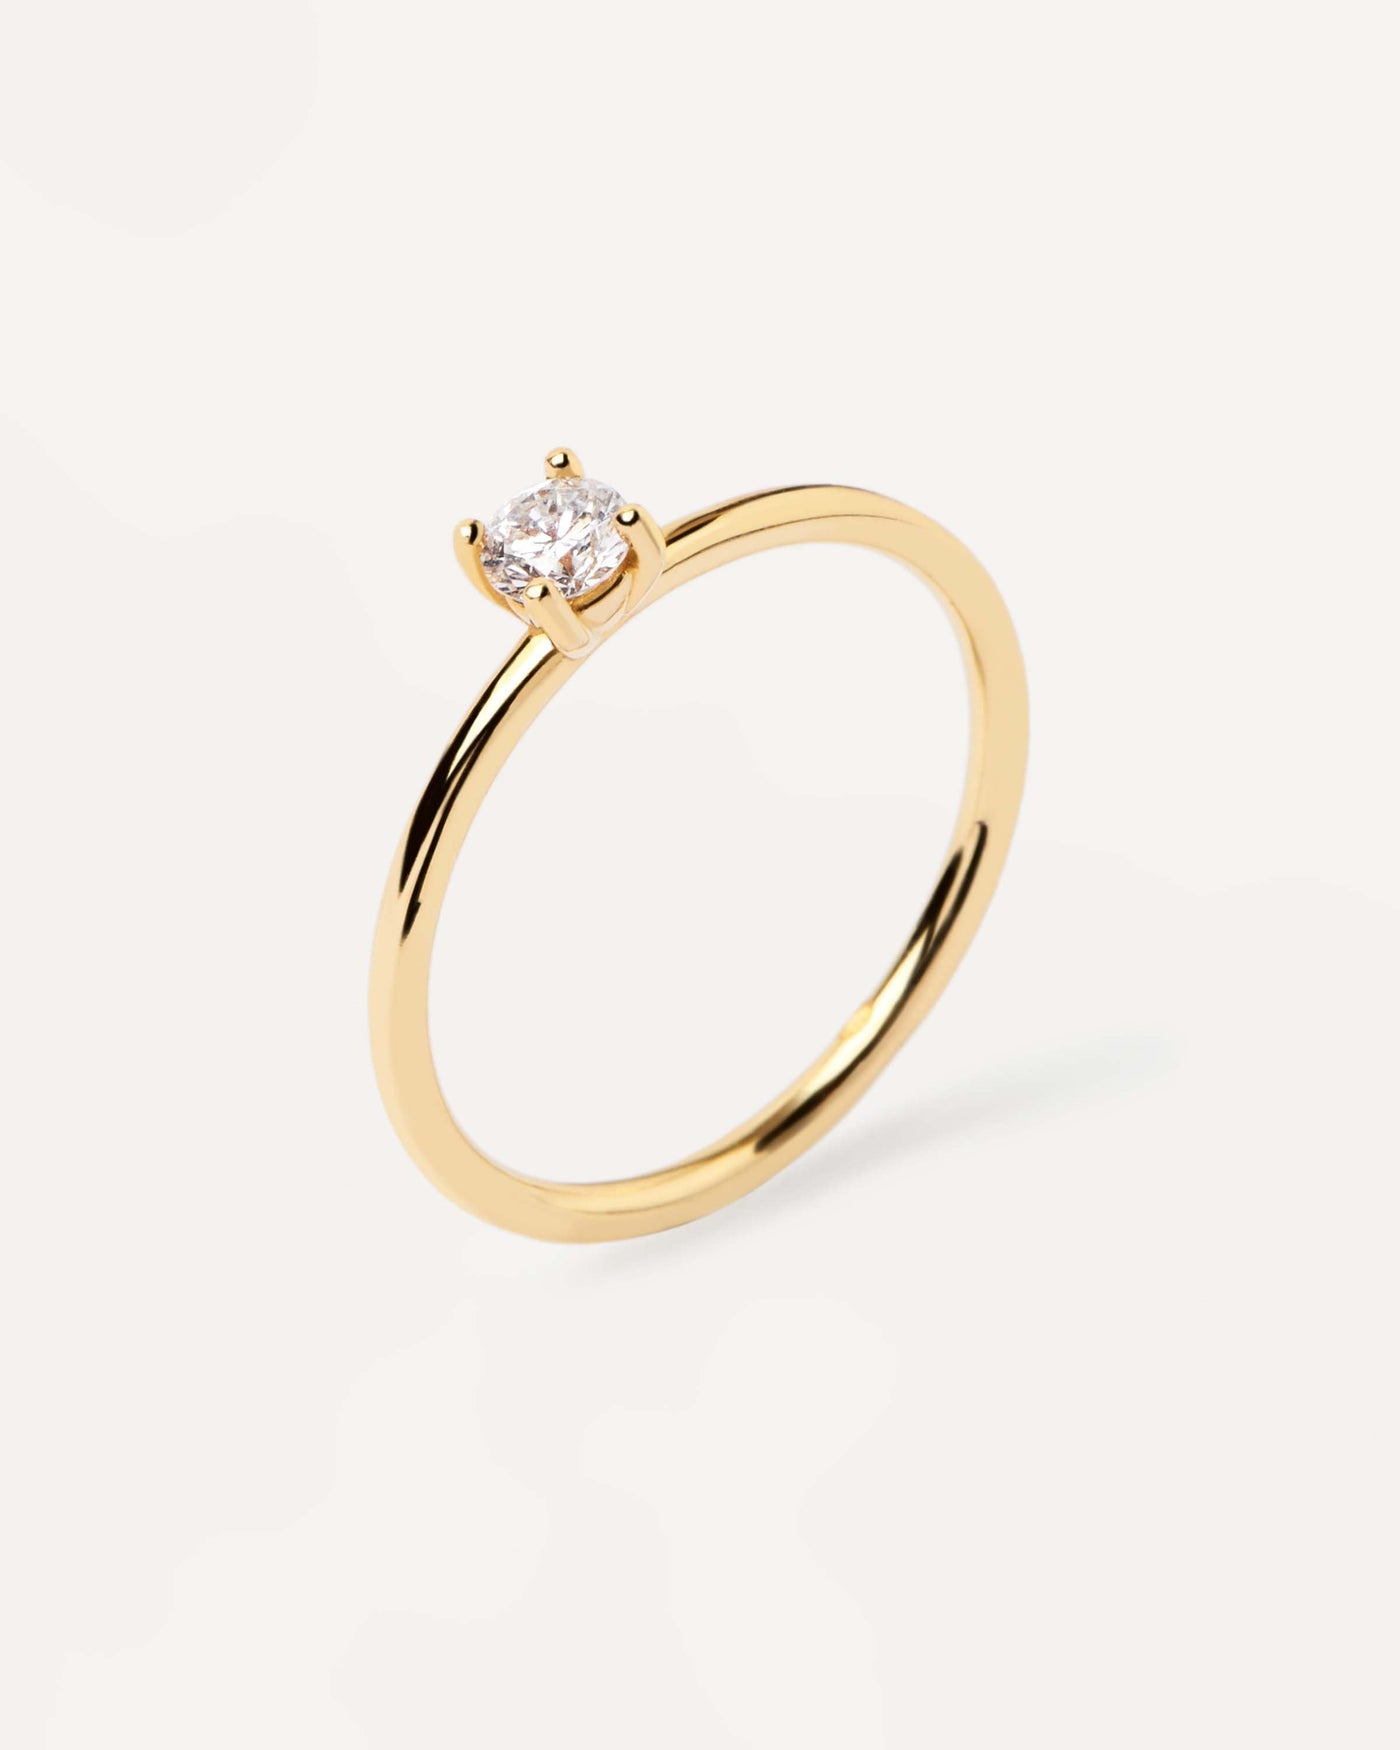 2023 Selection | Diamonds and gold Solitaire Medium Ring. 18K yellow gold Solitaire ring set with a 0.20 carat diamond. Get the latest arrival from PDPAOLA. Place your order safely and get this Best Seller. Free Shipping.